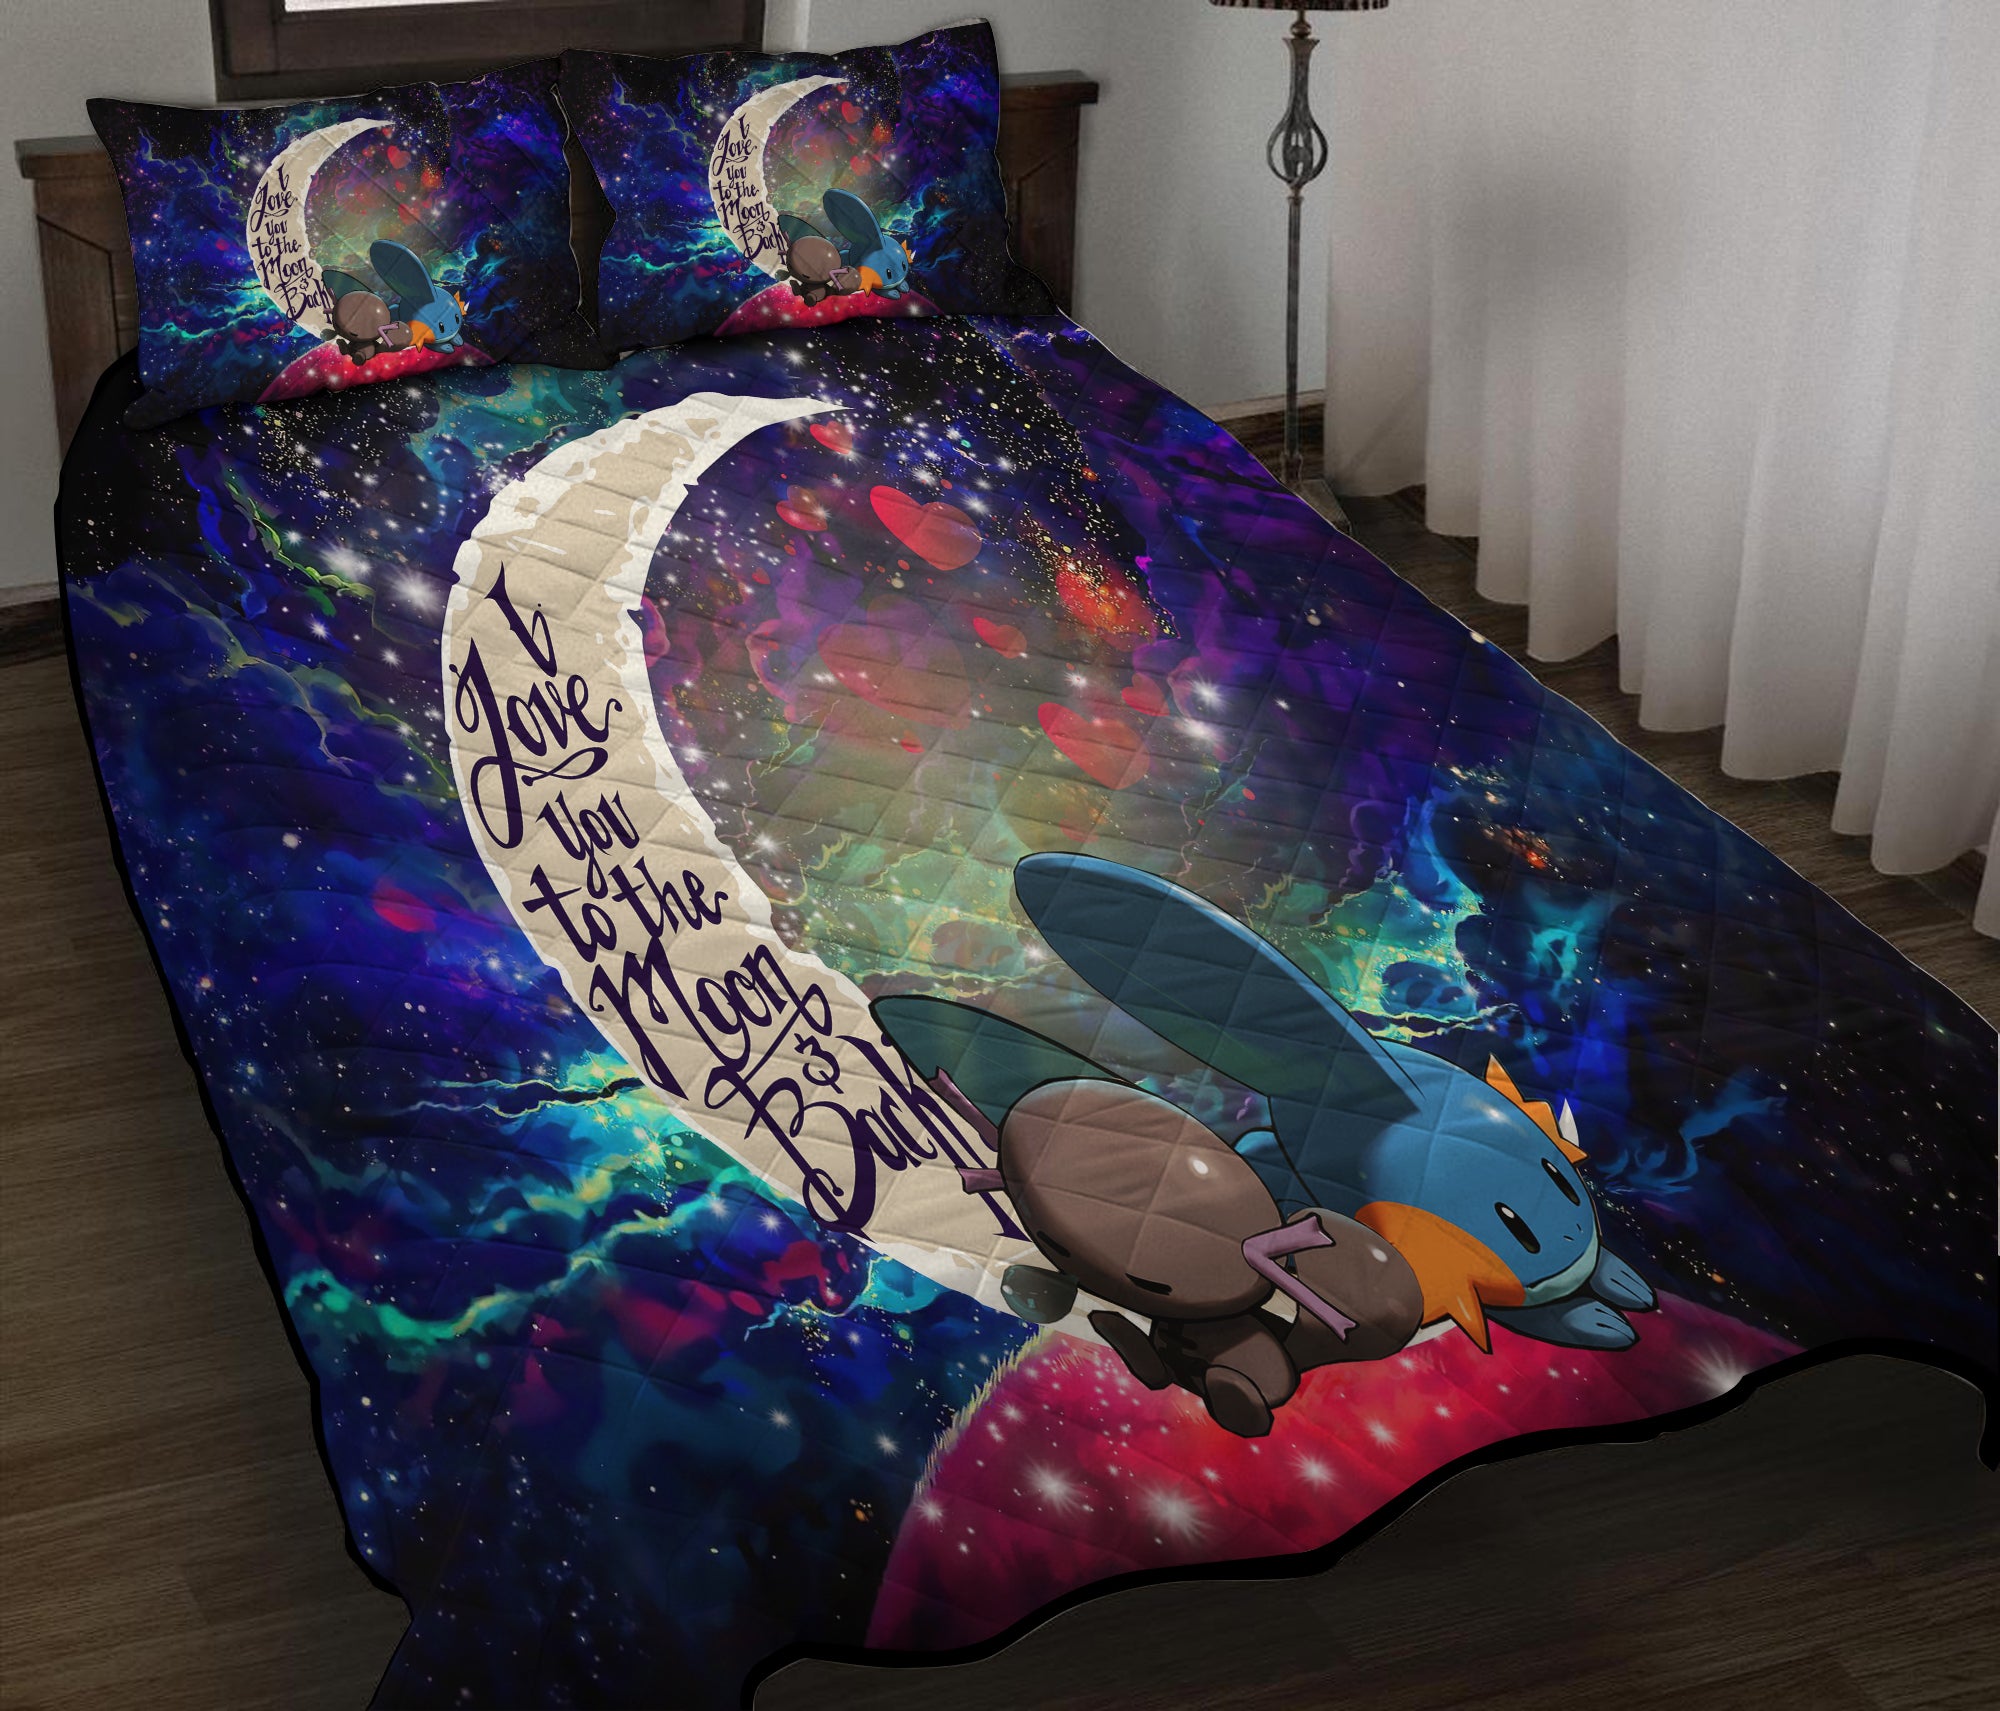 Pokemon Mudkip Love You To The Moon Galaxy Quilt Bed Sets Nearkii